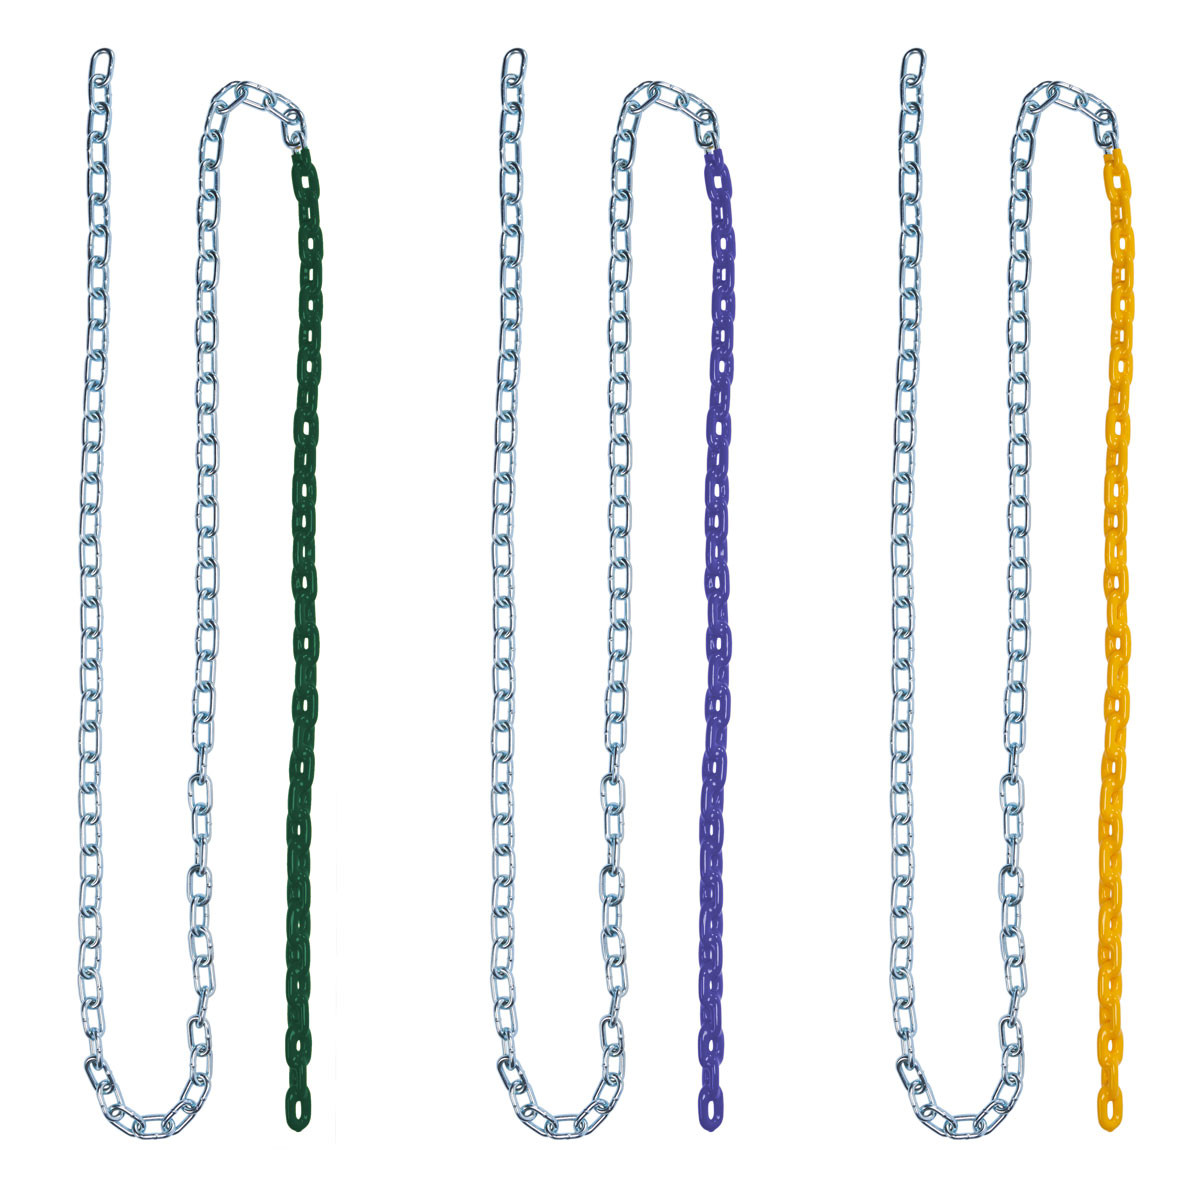 Plastisol Coated Swing Chain - Blue, Green, Yellow